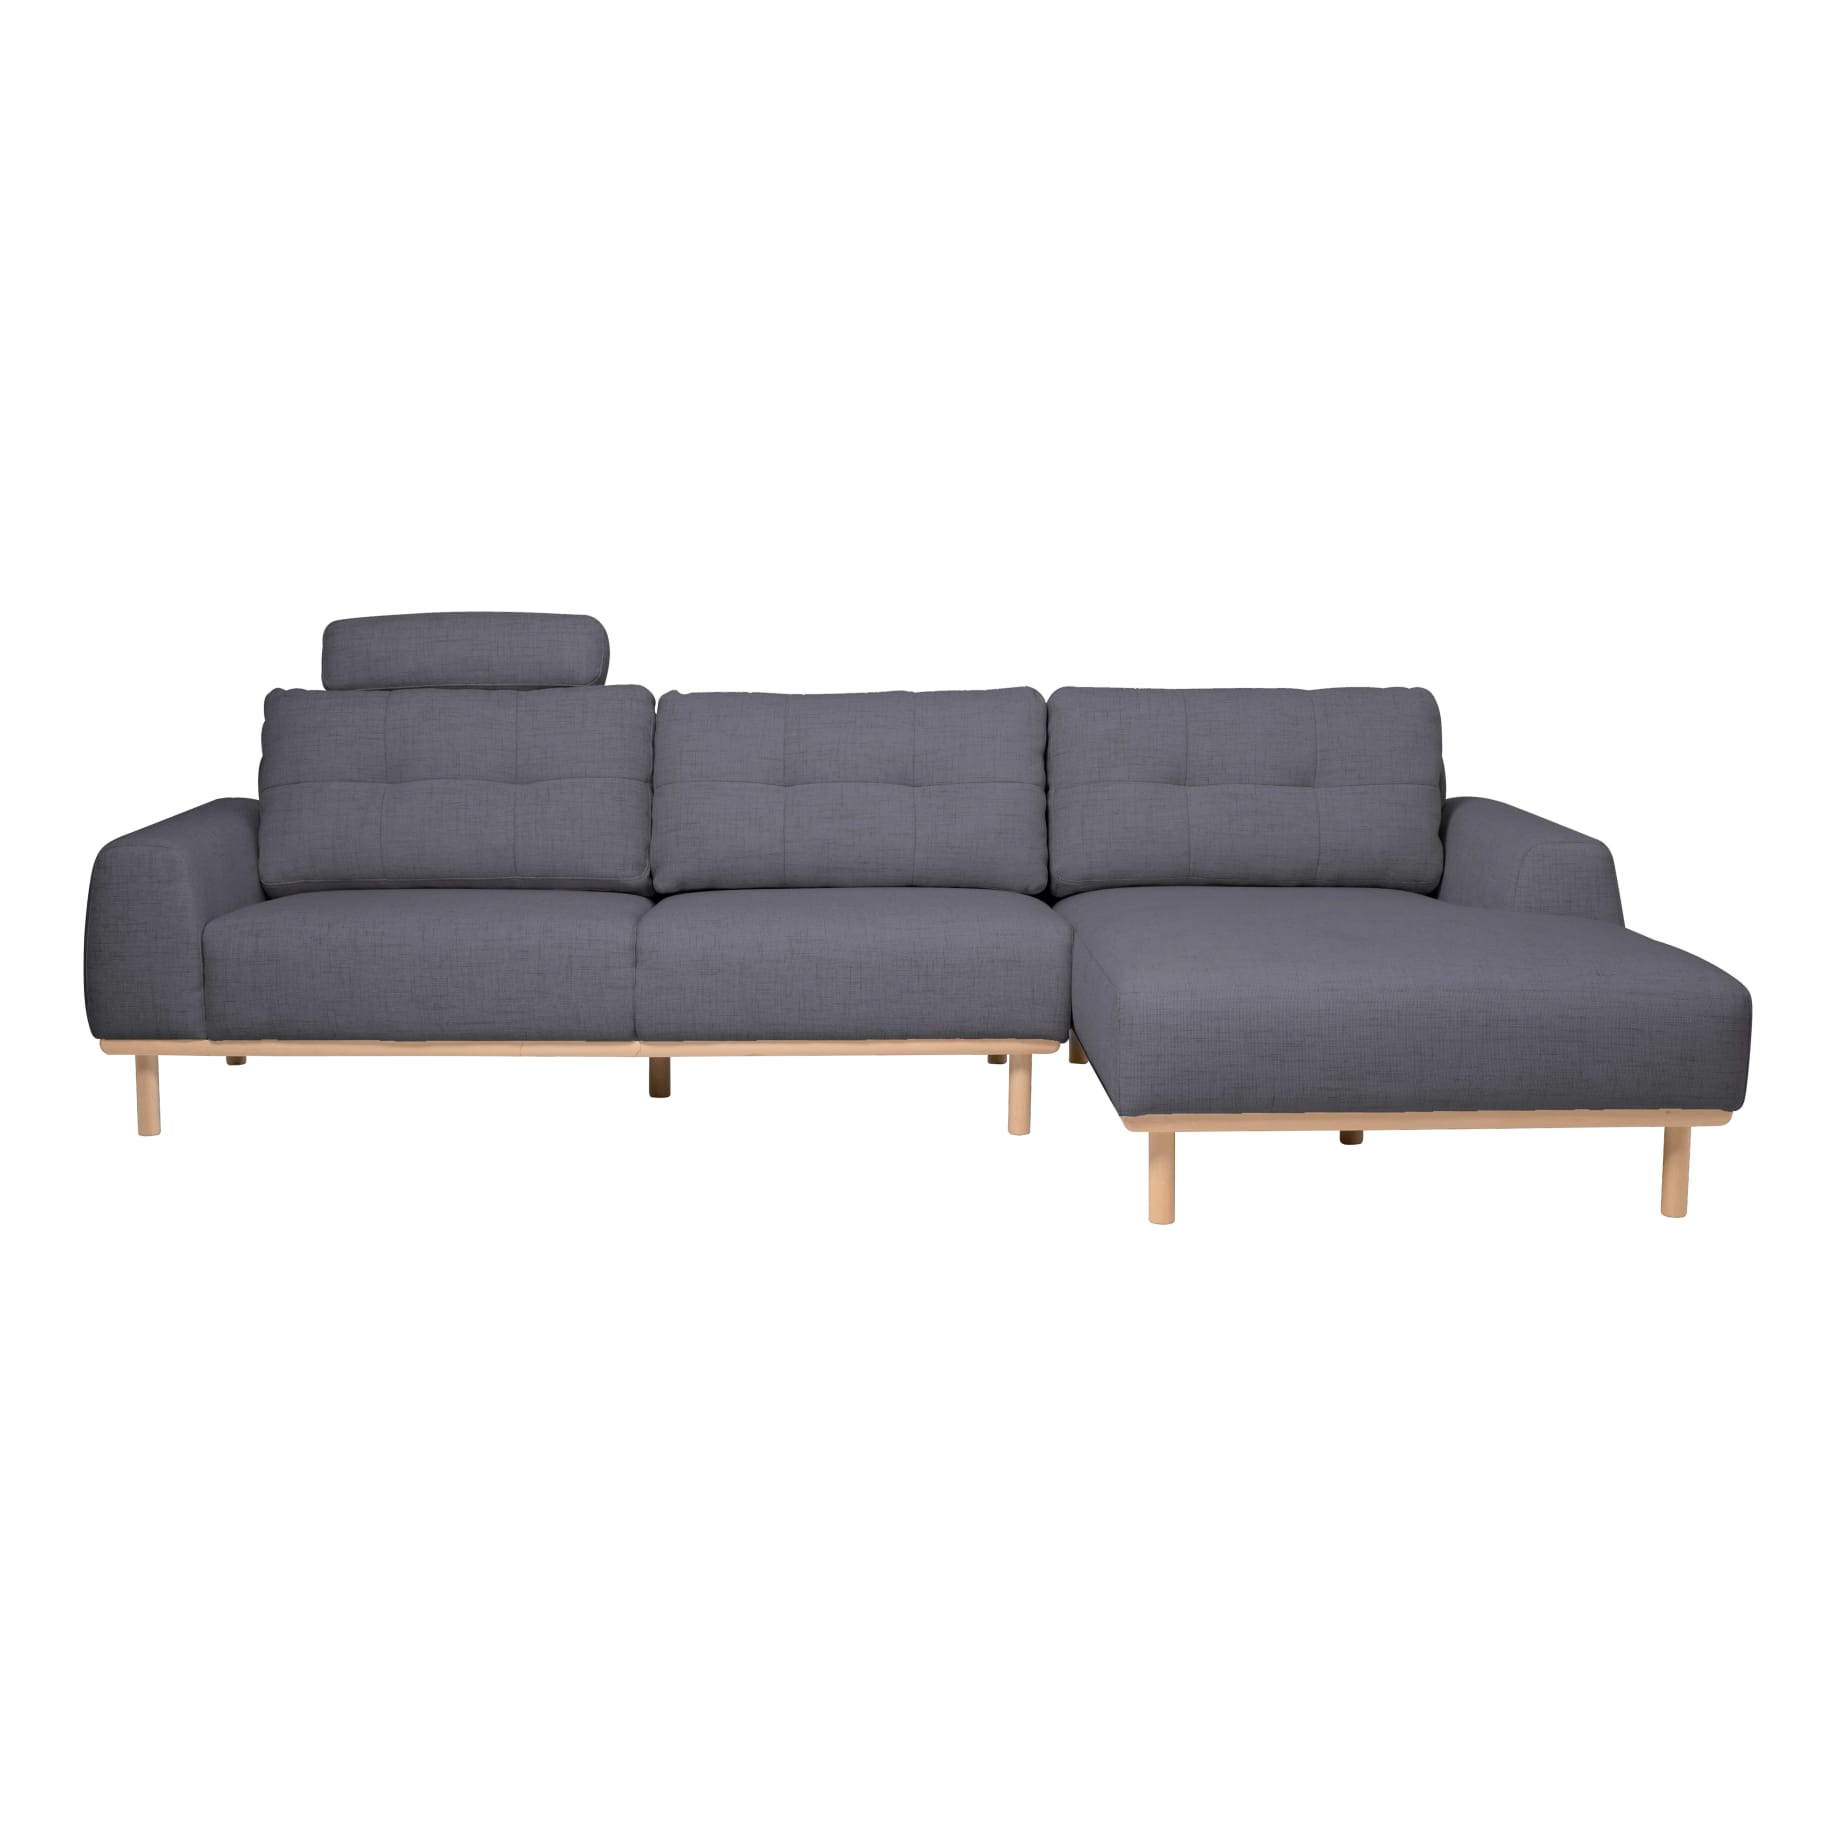 Stratton 3 Seater Sofa + Chaise RHF in Cloud Storm